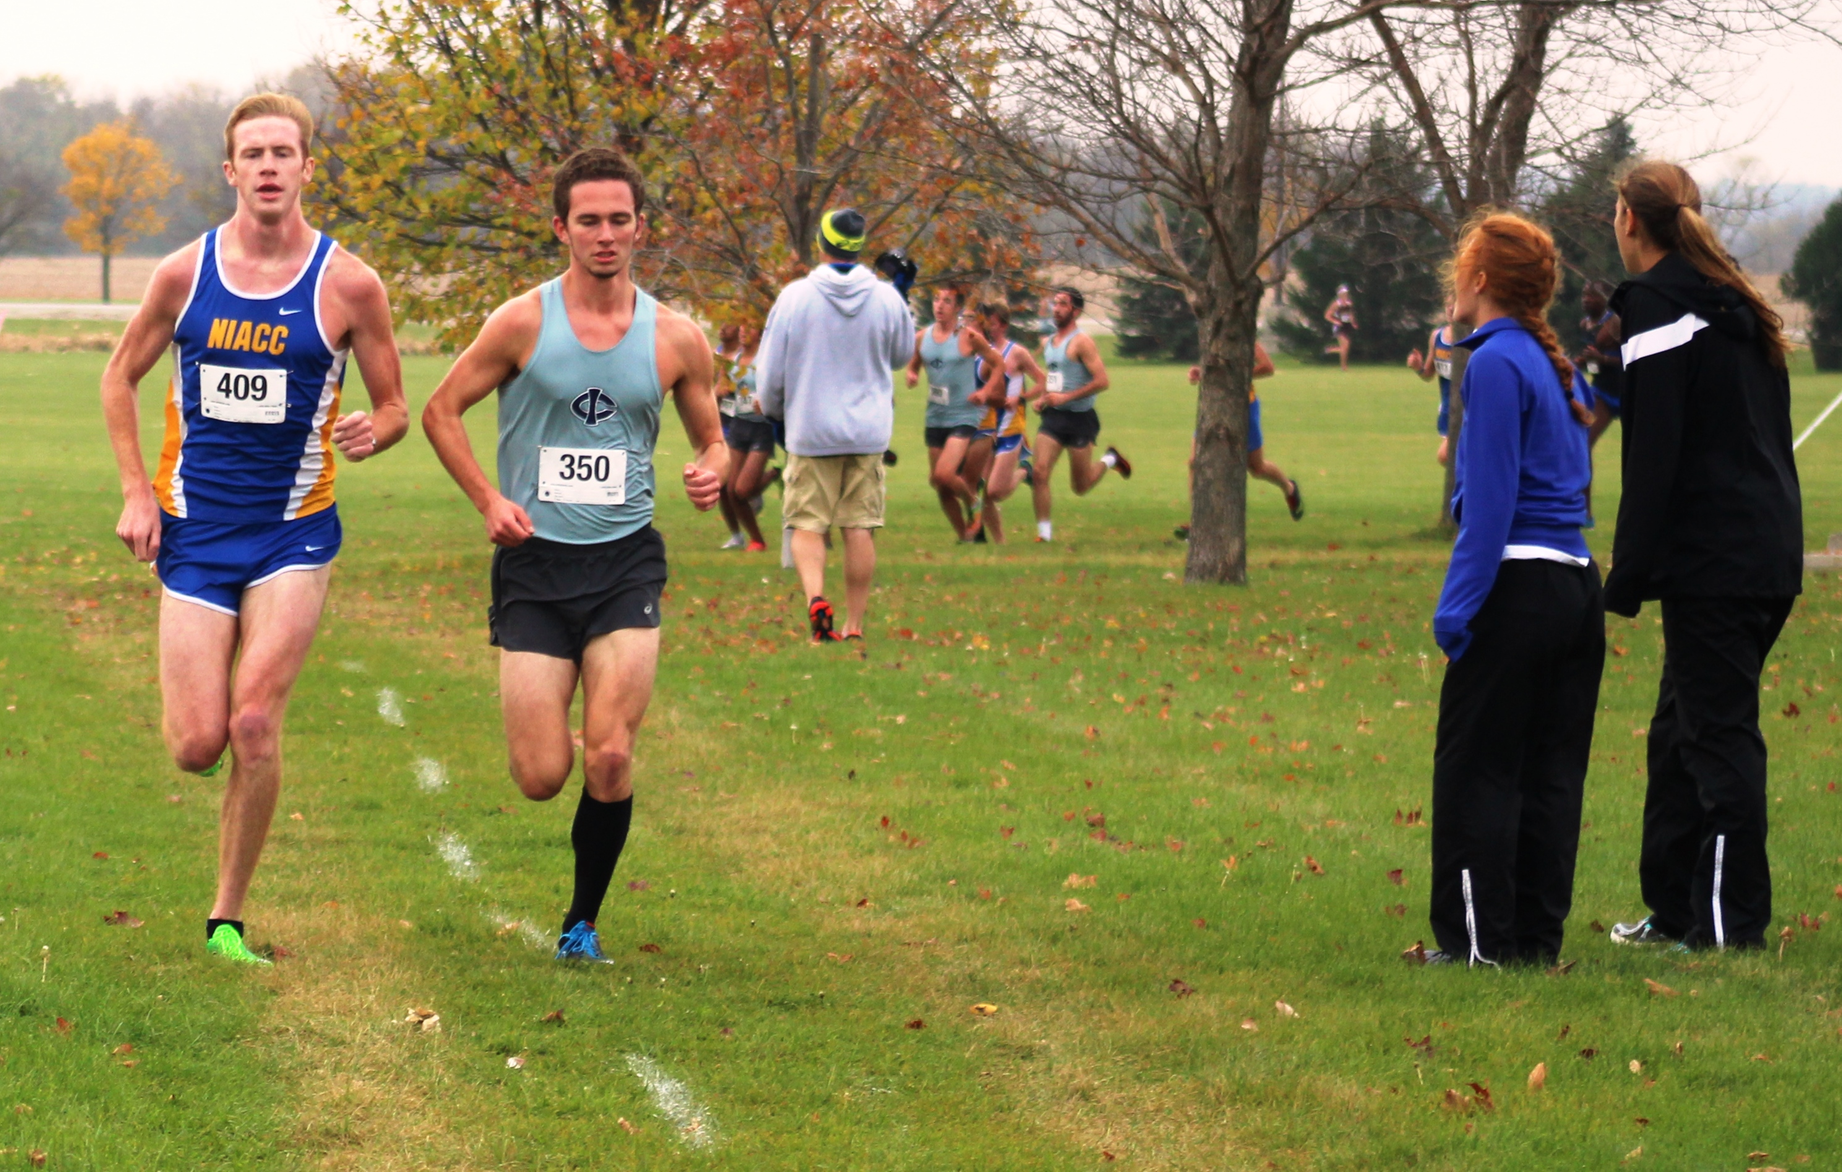 NIACC men ranked No. 9, Lady Trojans 22nd in cross country poll